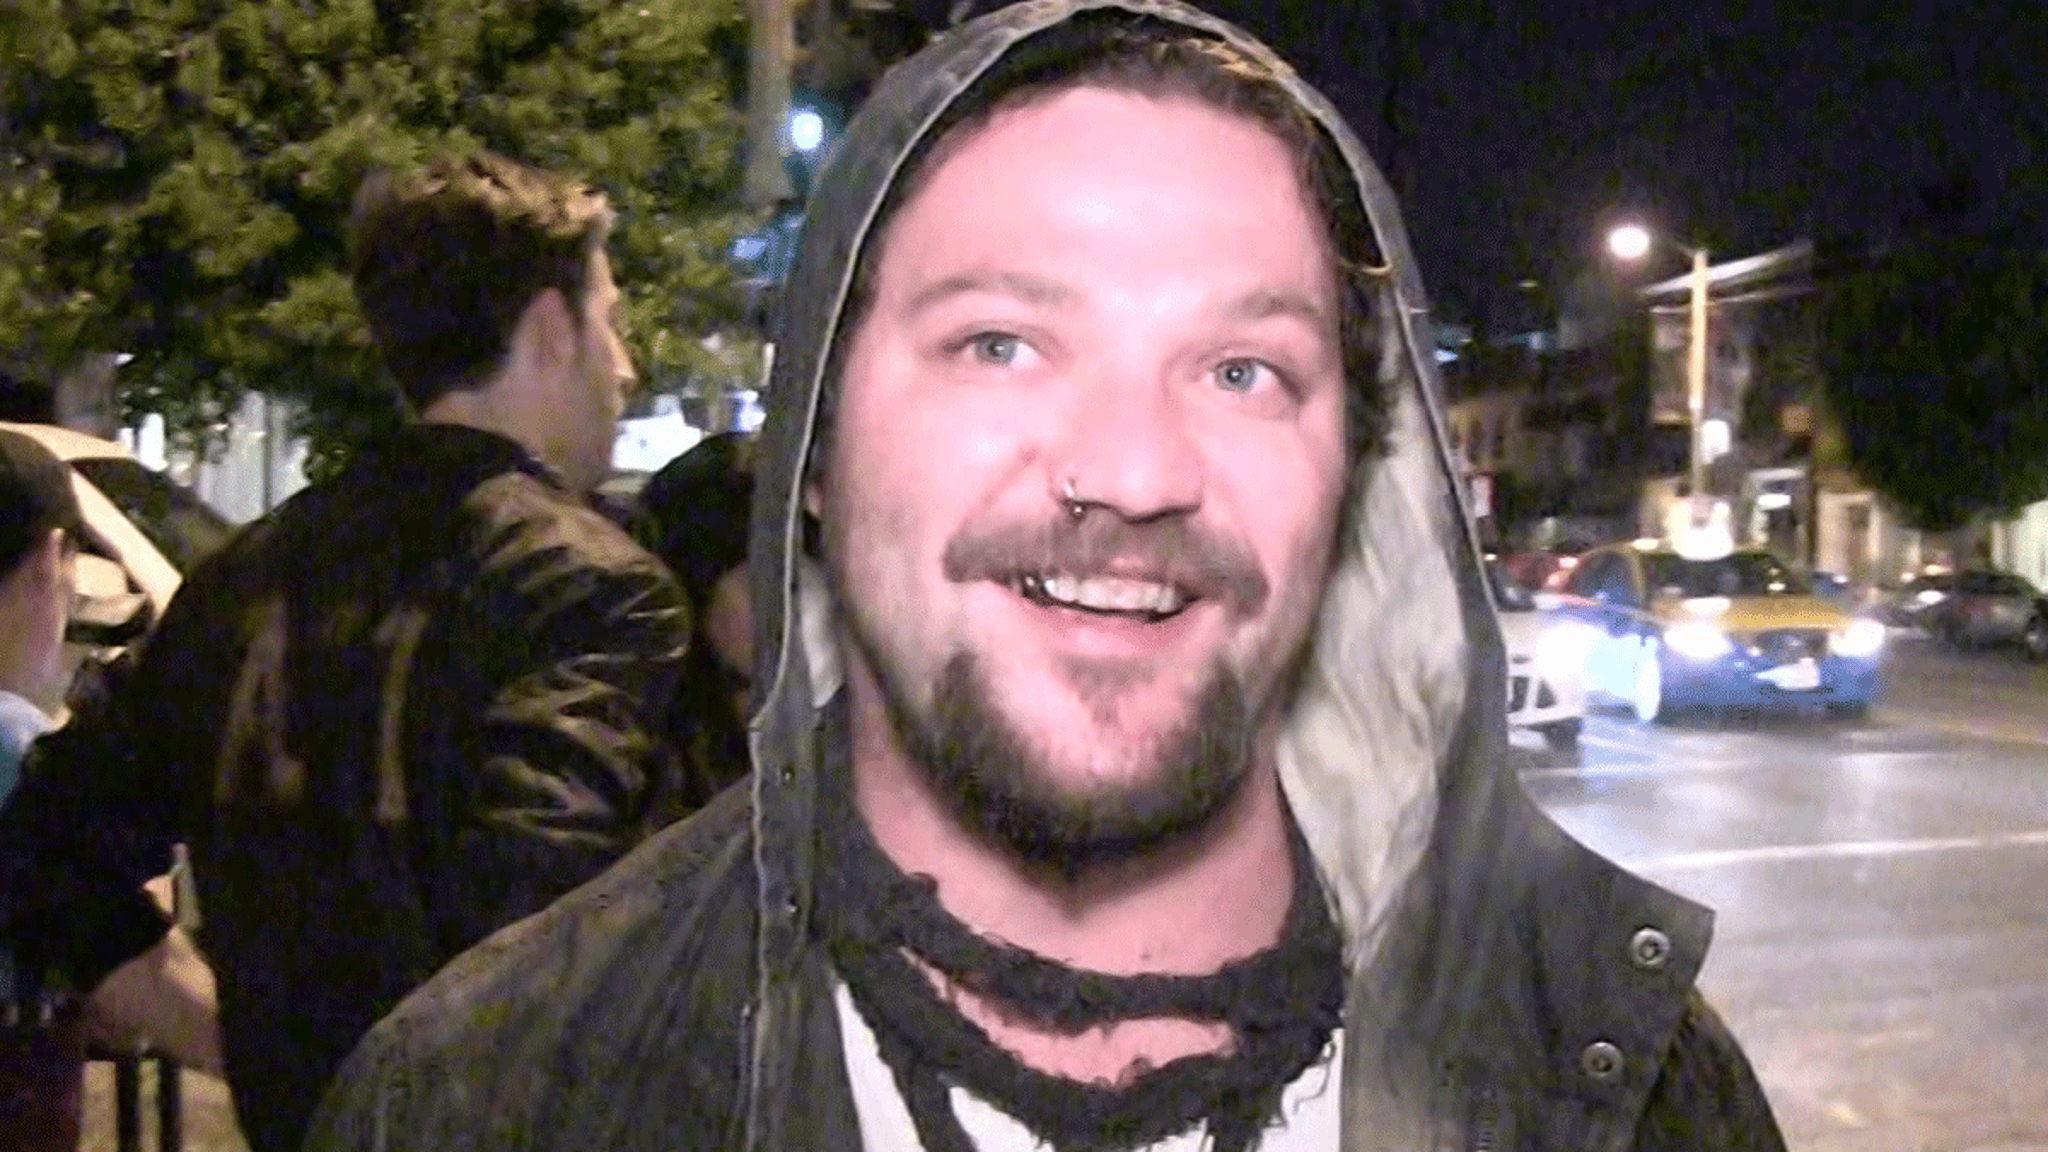 Bam Margera released from hospital after nasty bout with pneumonia